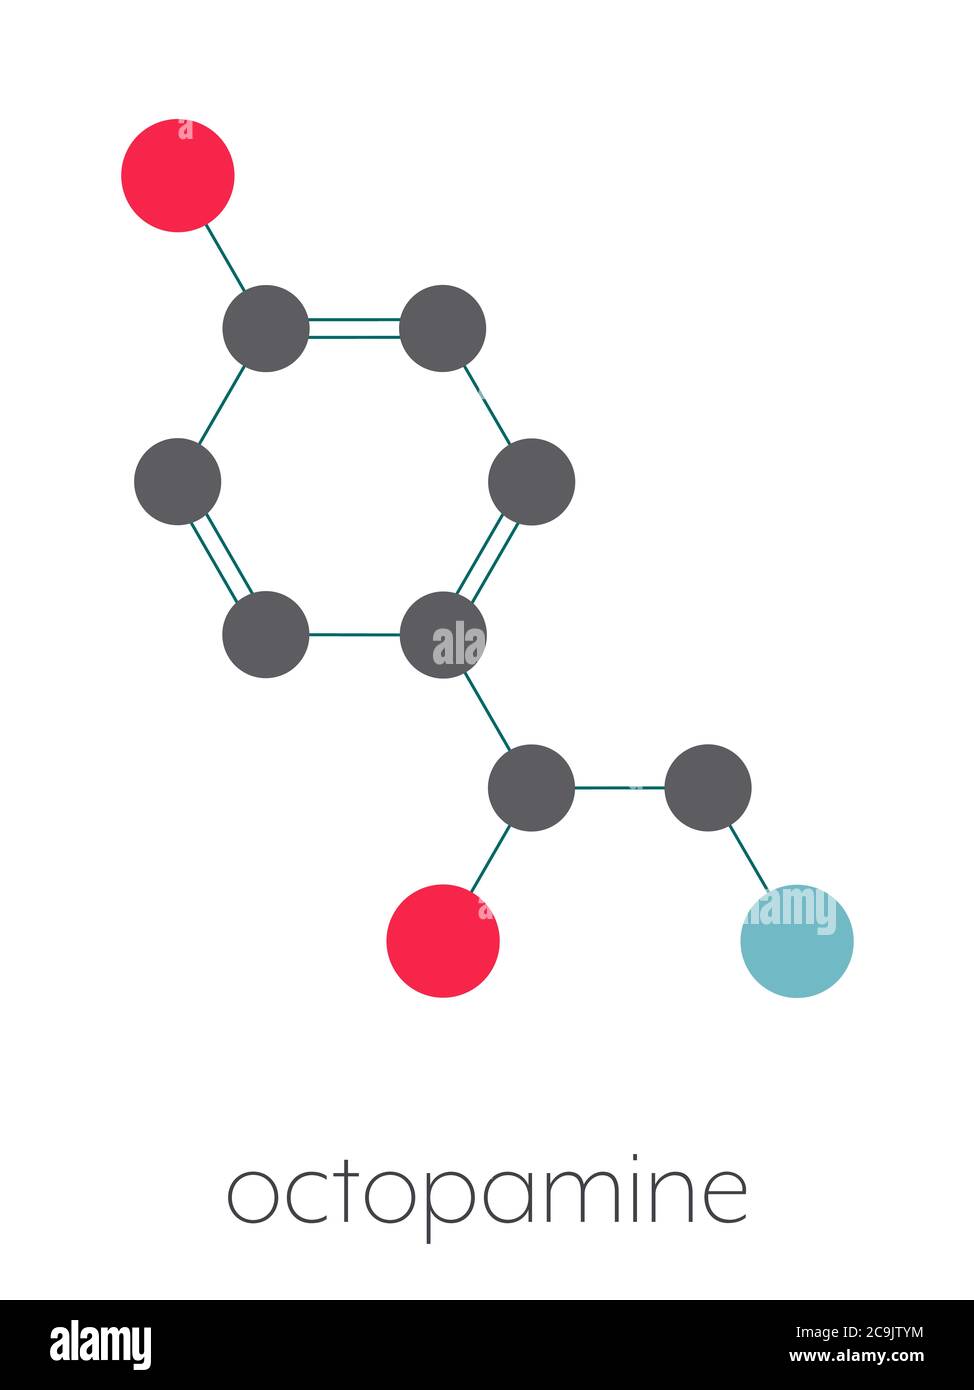 Octopamine stimulant drug molecule (sympathomimetic agent). Stylized skeletal formula (chemical structure). Atoms are shown as color-coded circles con Stock Photo